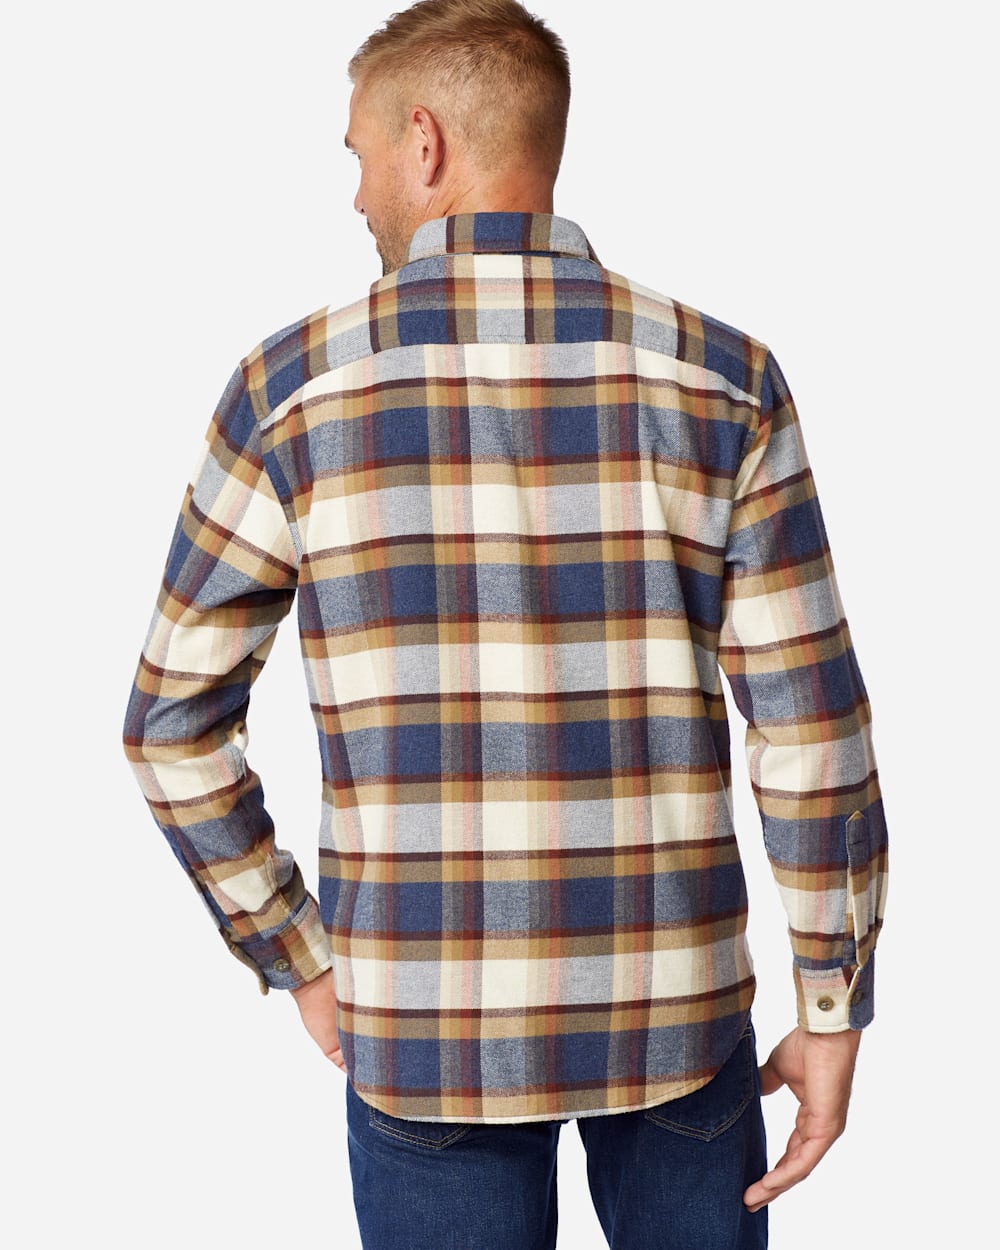 ALTERNATE VIEW OF BURNSIDE DOUBLE-BRUSHED FLANNEL SHIRT IN BLUE/CREAM/HENNA PLAID image number 3